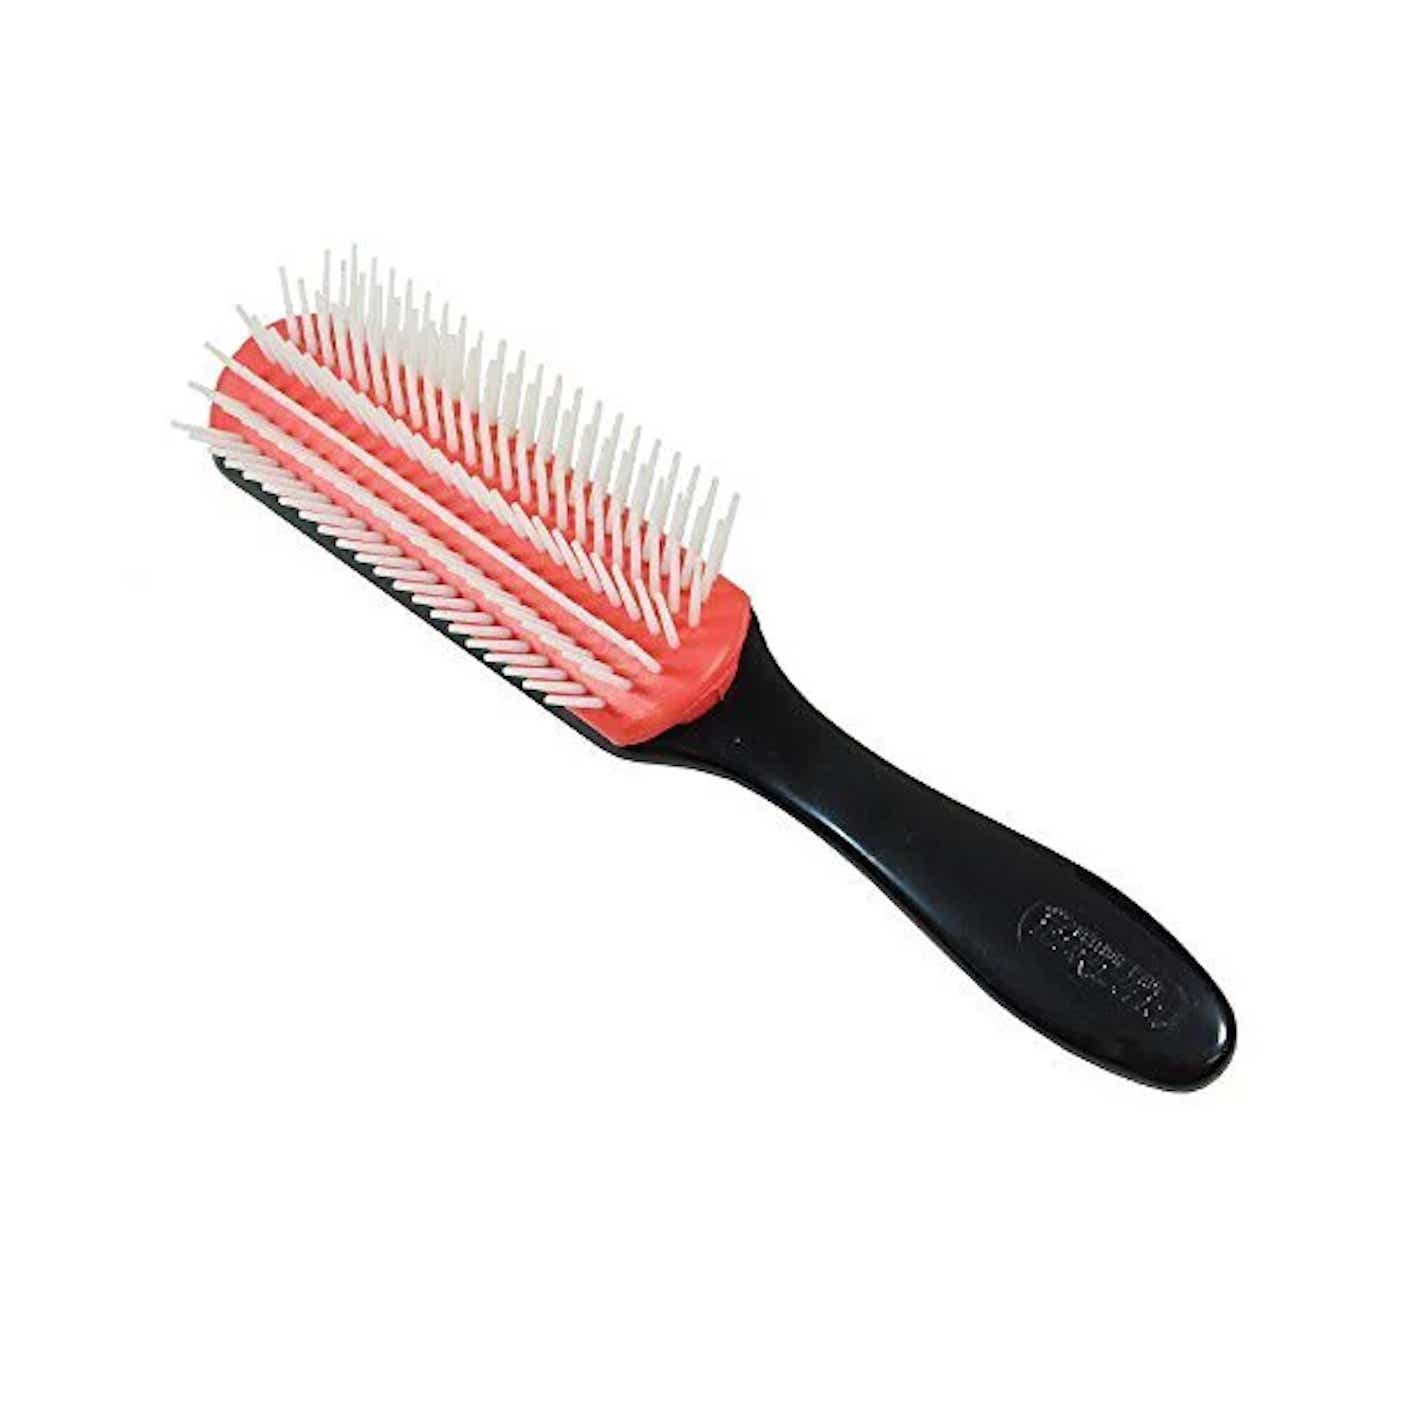 A black handled, red brush with white plastic bristles sits on a white surface.